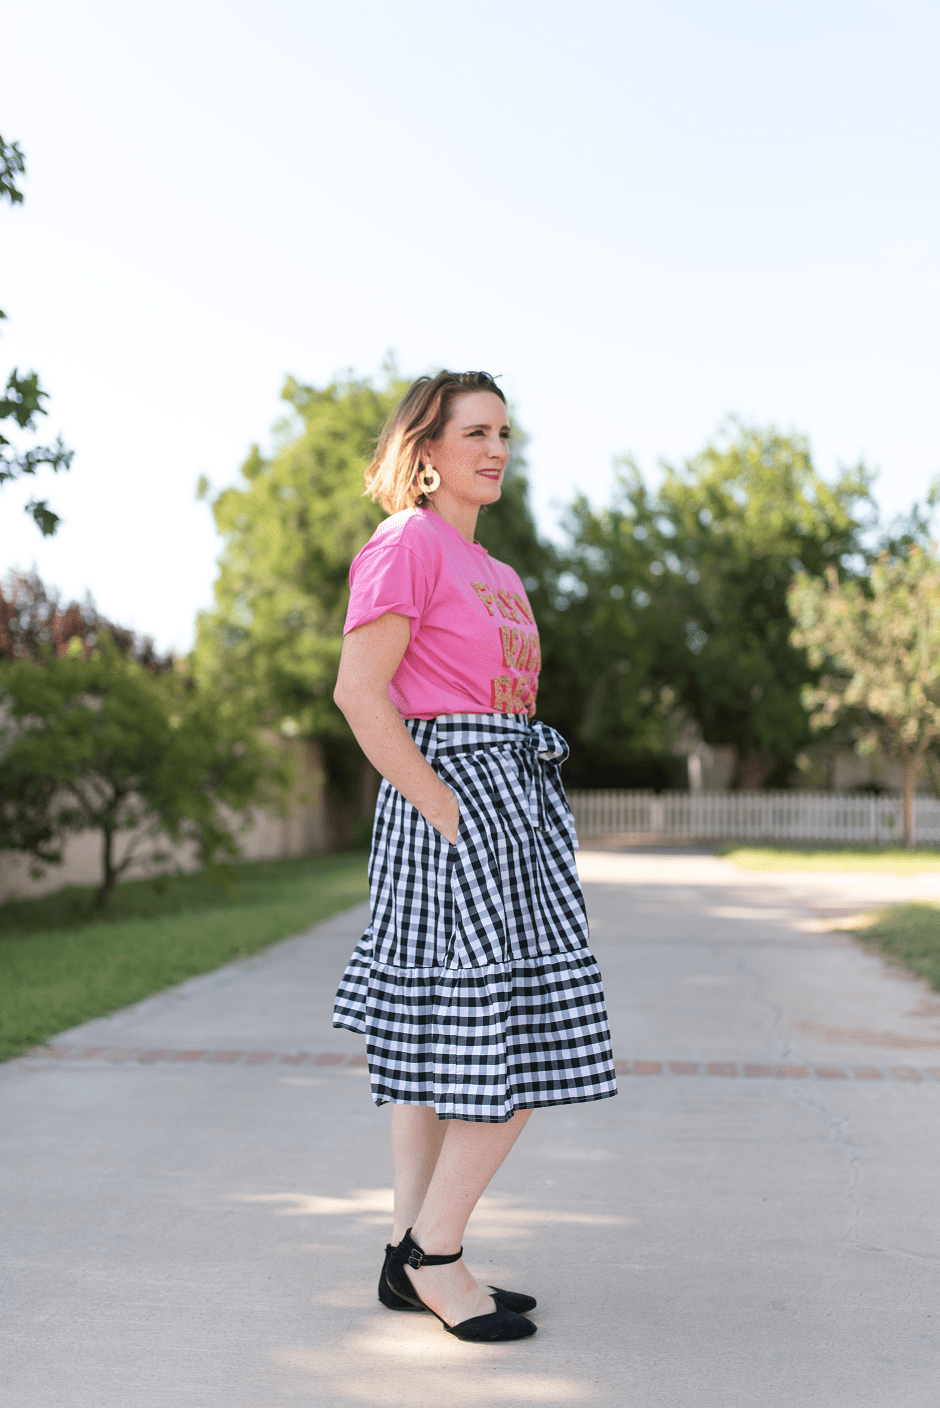 Gingham is still going strong as a trend in women's clothing and we're loving it! But it's not always easy to figure out what to wear with it. Read on for tips on how to style a gingham skirt and ensure you keep it looking grown up!